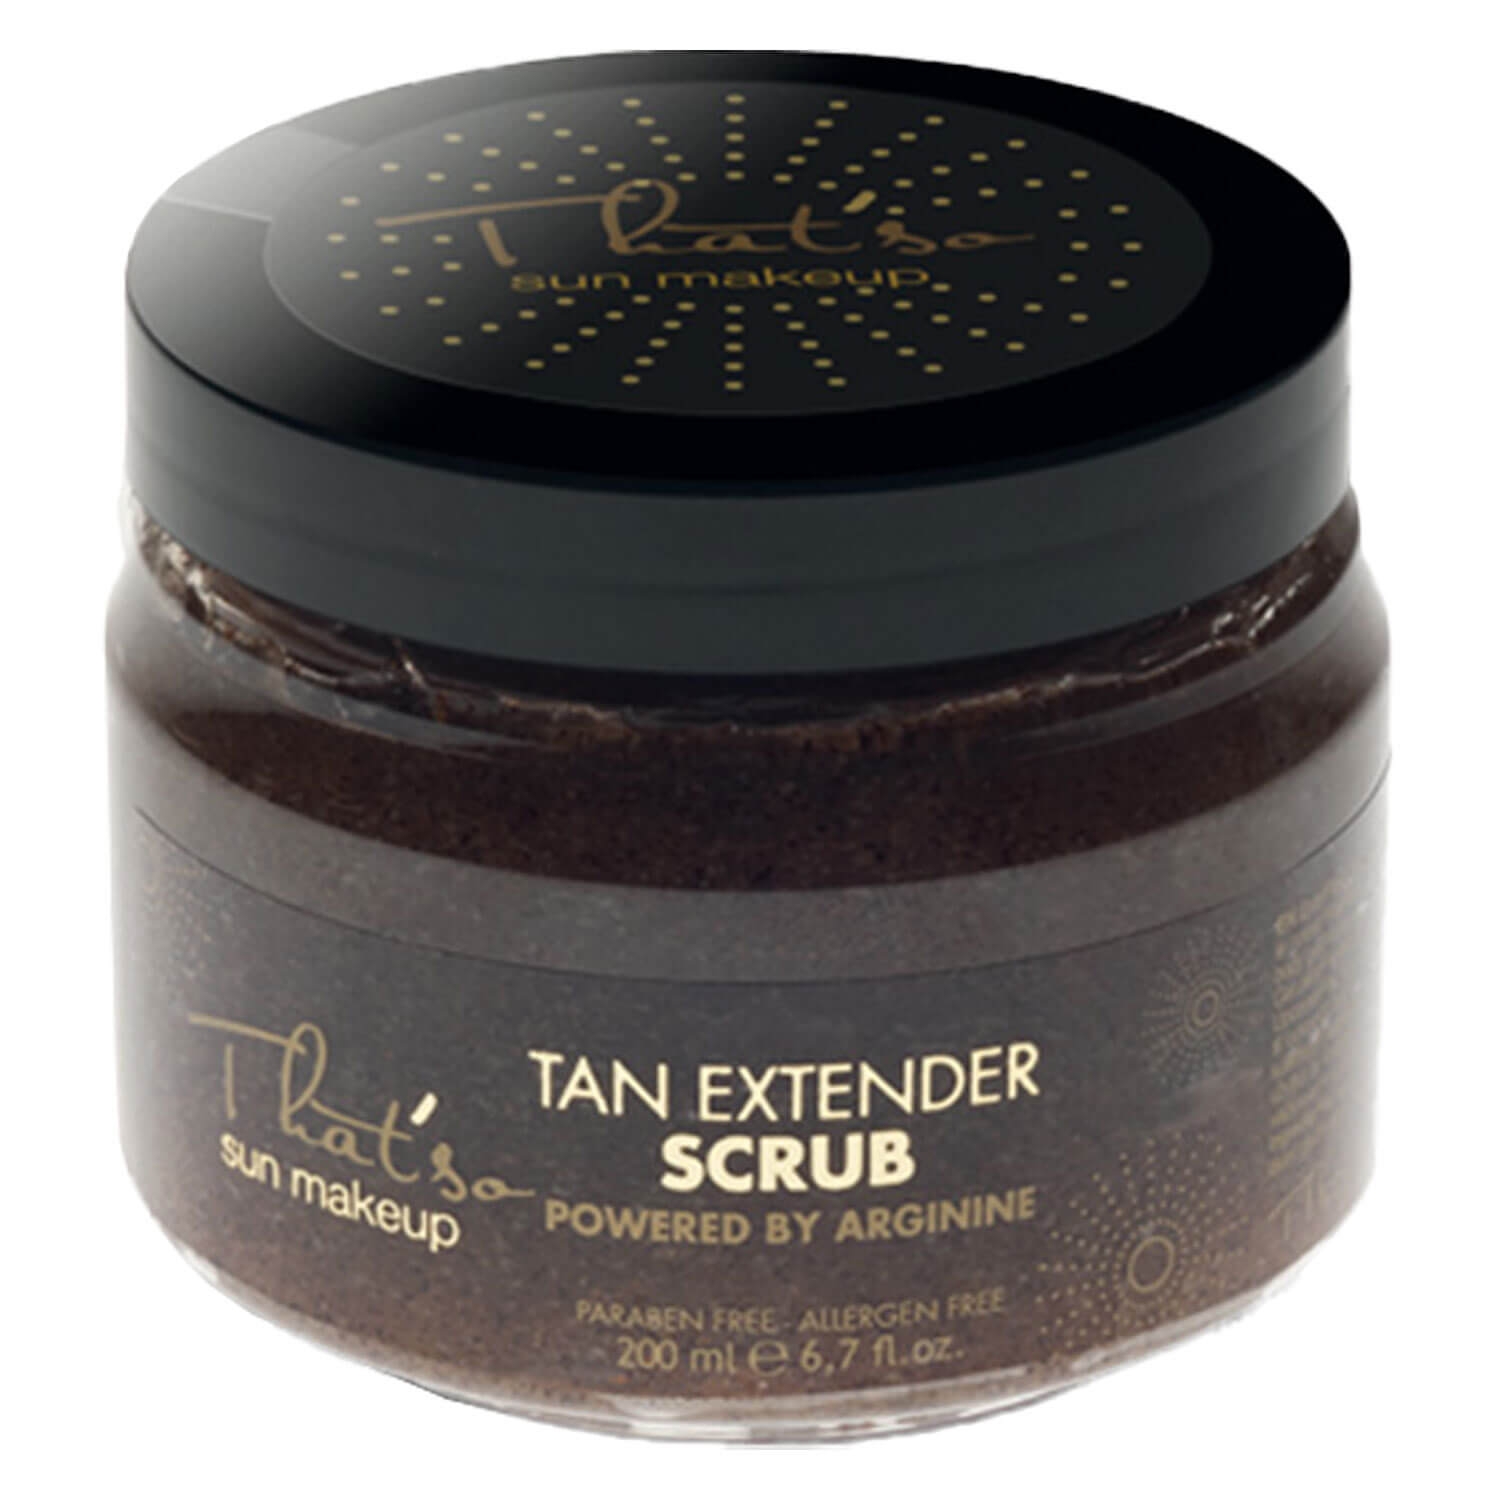 Product image from That'so - TAN EXTENDER SCRUB